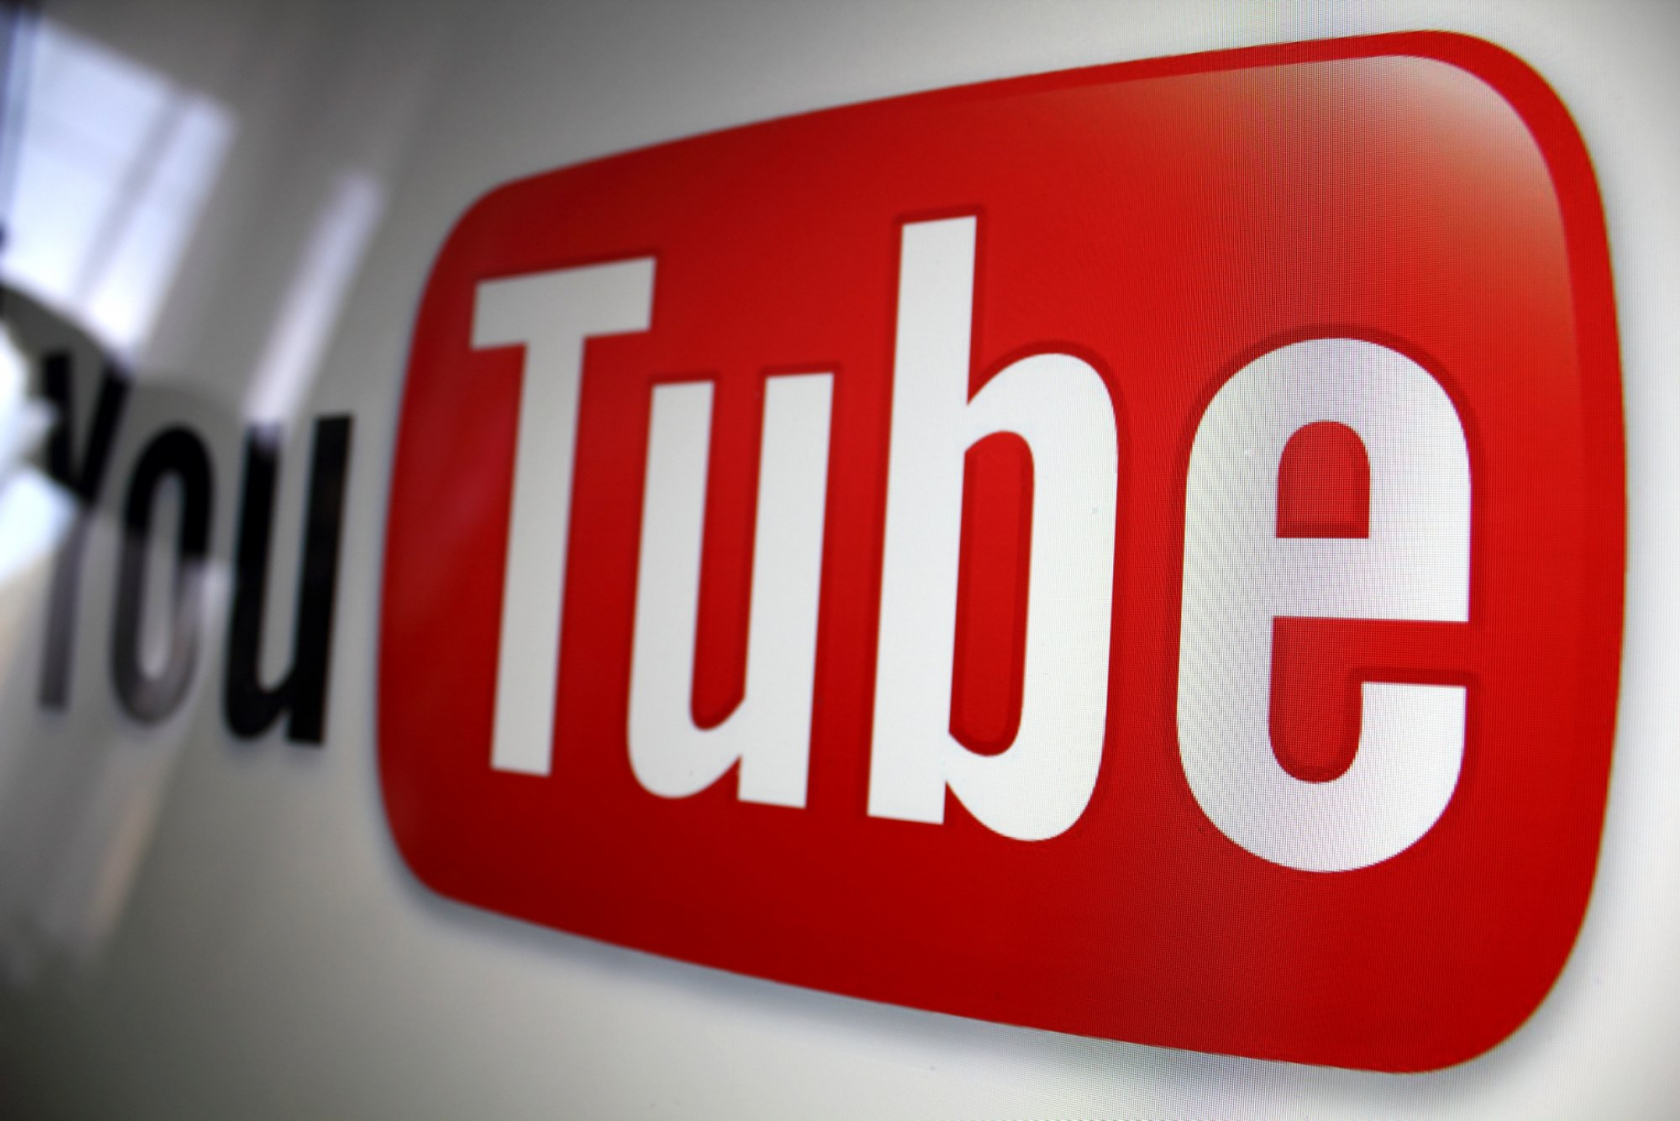 Two men accused of stealing $20 million in music royalties from YouTube by claiming to own the rights